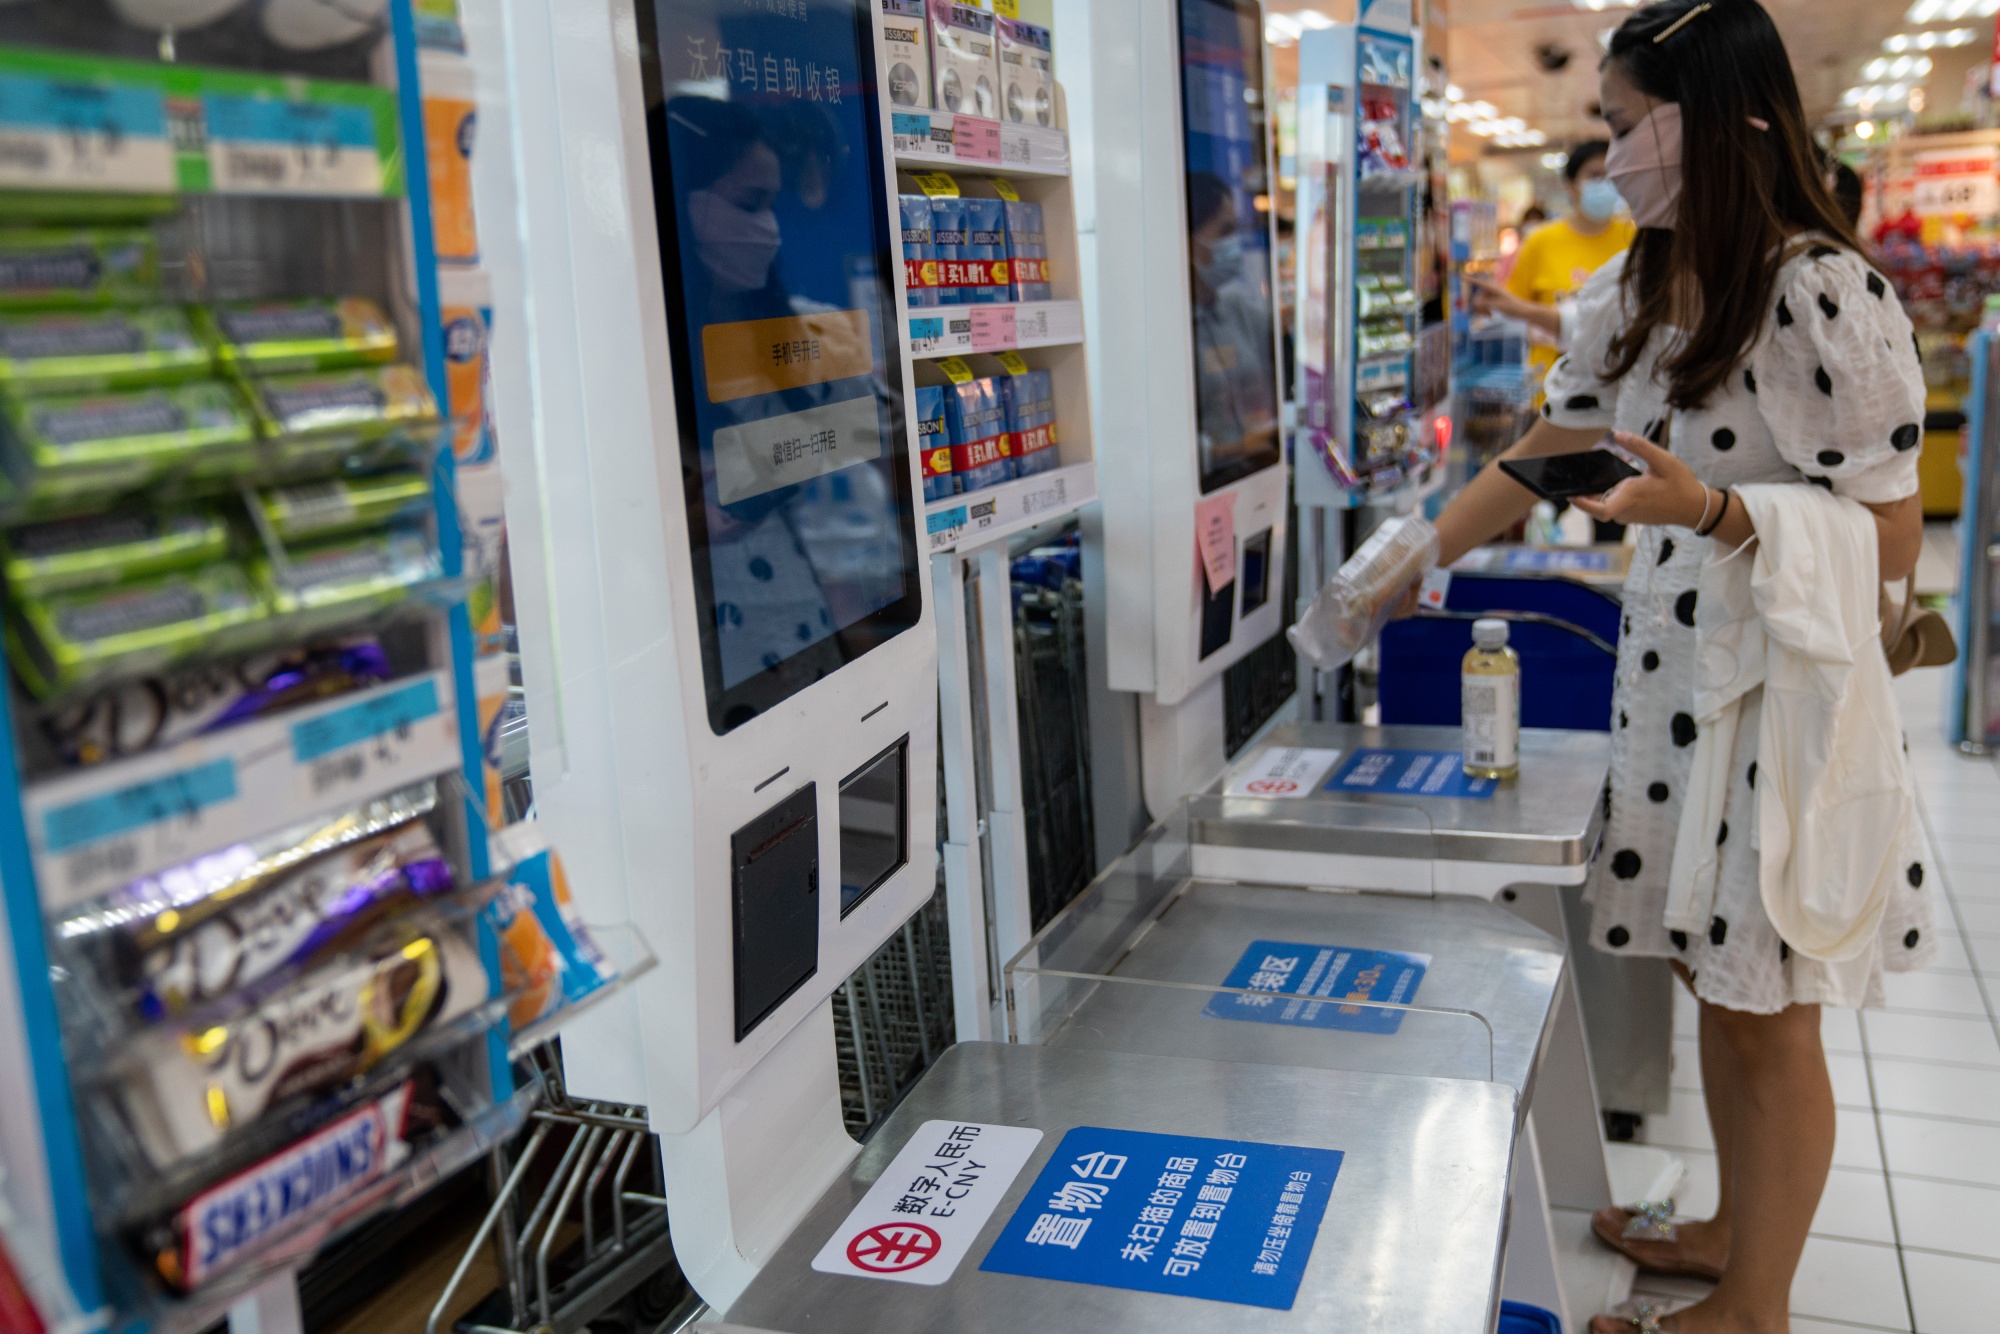 Signage for the digital yuan at a self check-out counter inside a supermarket in Shenzhen, China.&nbsp;